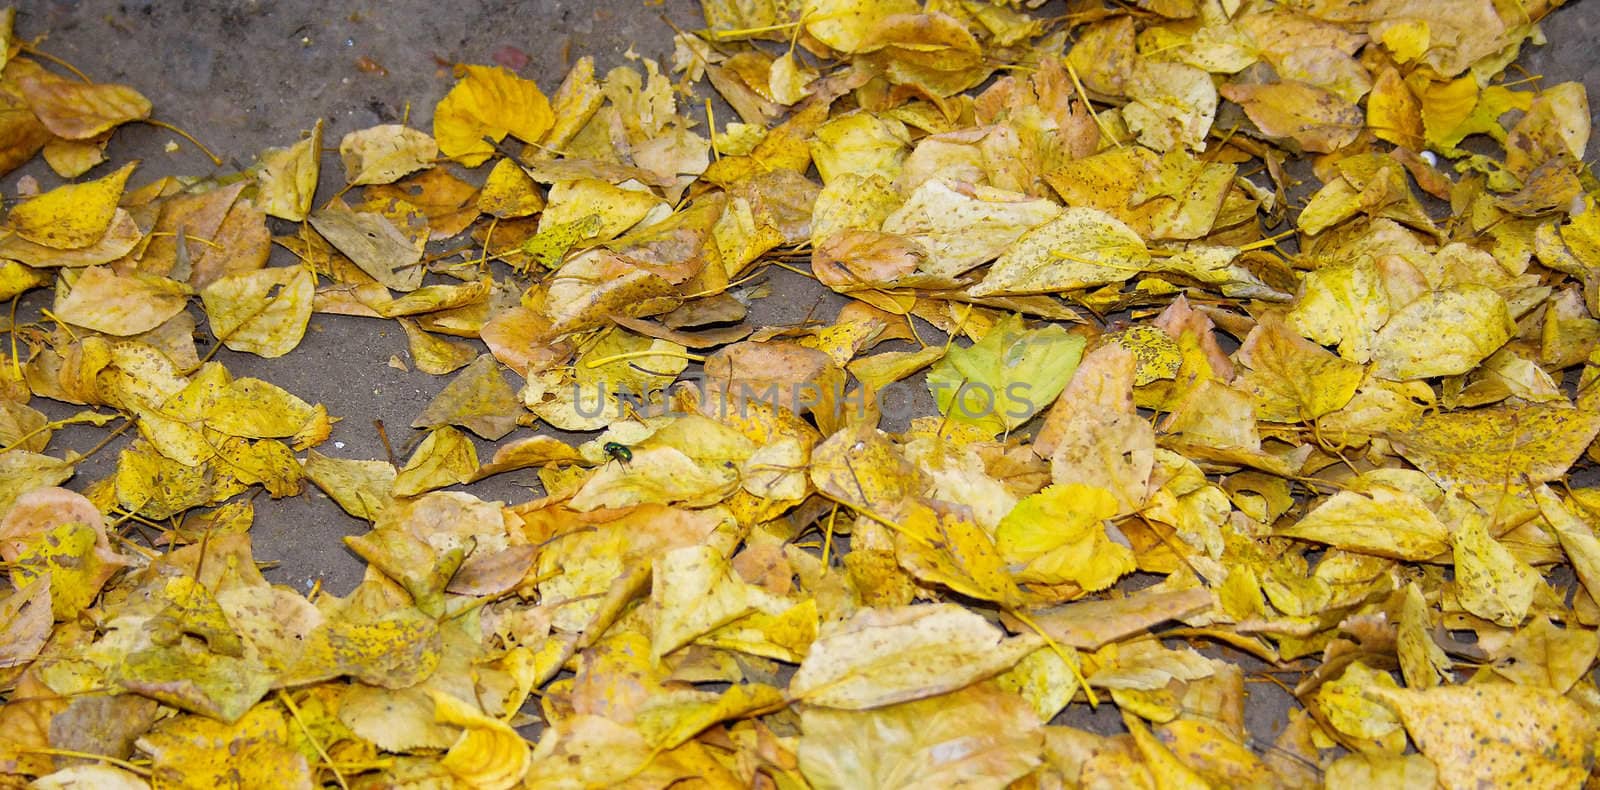 The yellow foliage which has fallen down on the earth. A texture